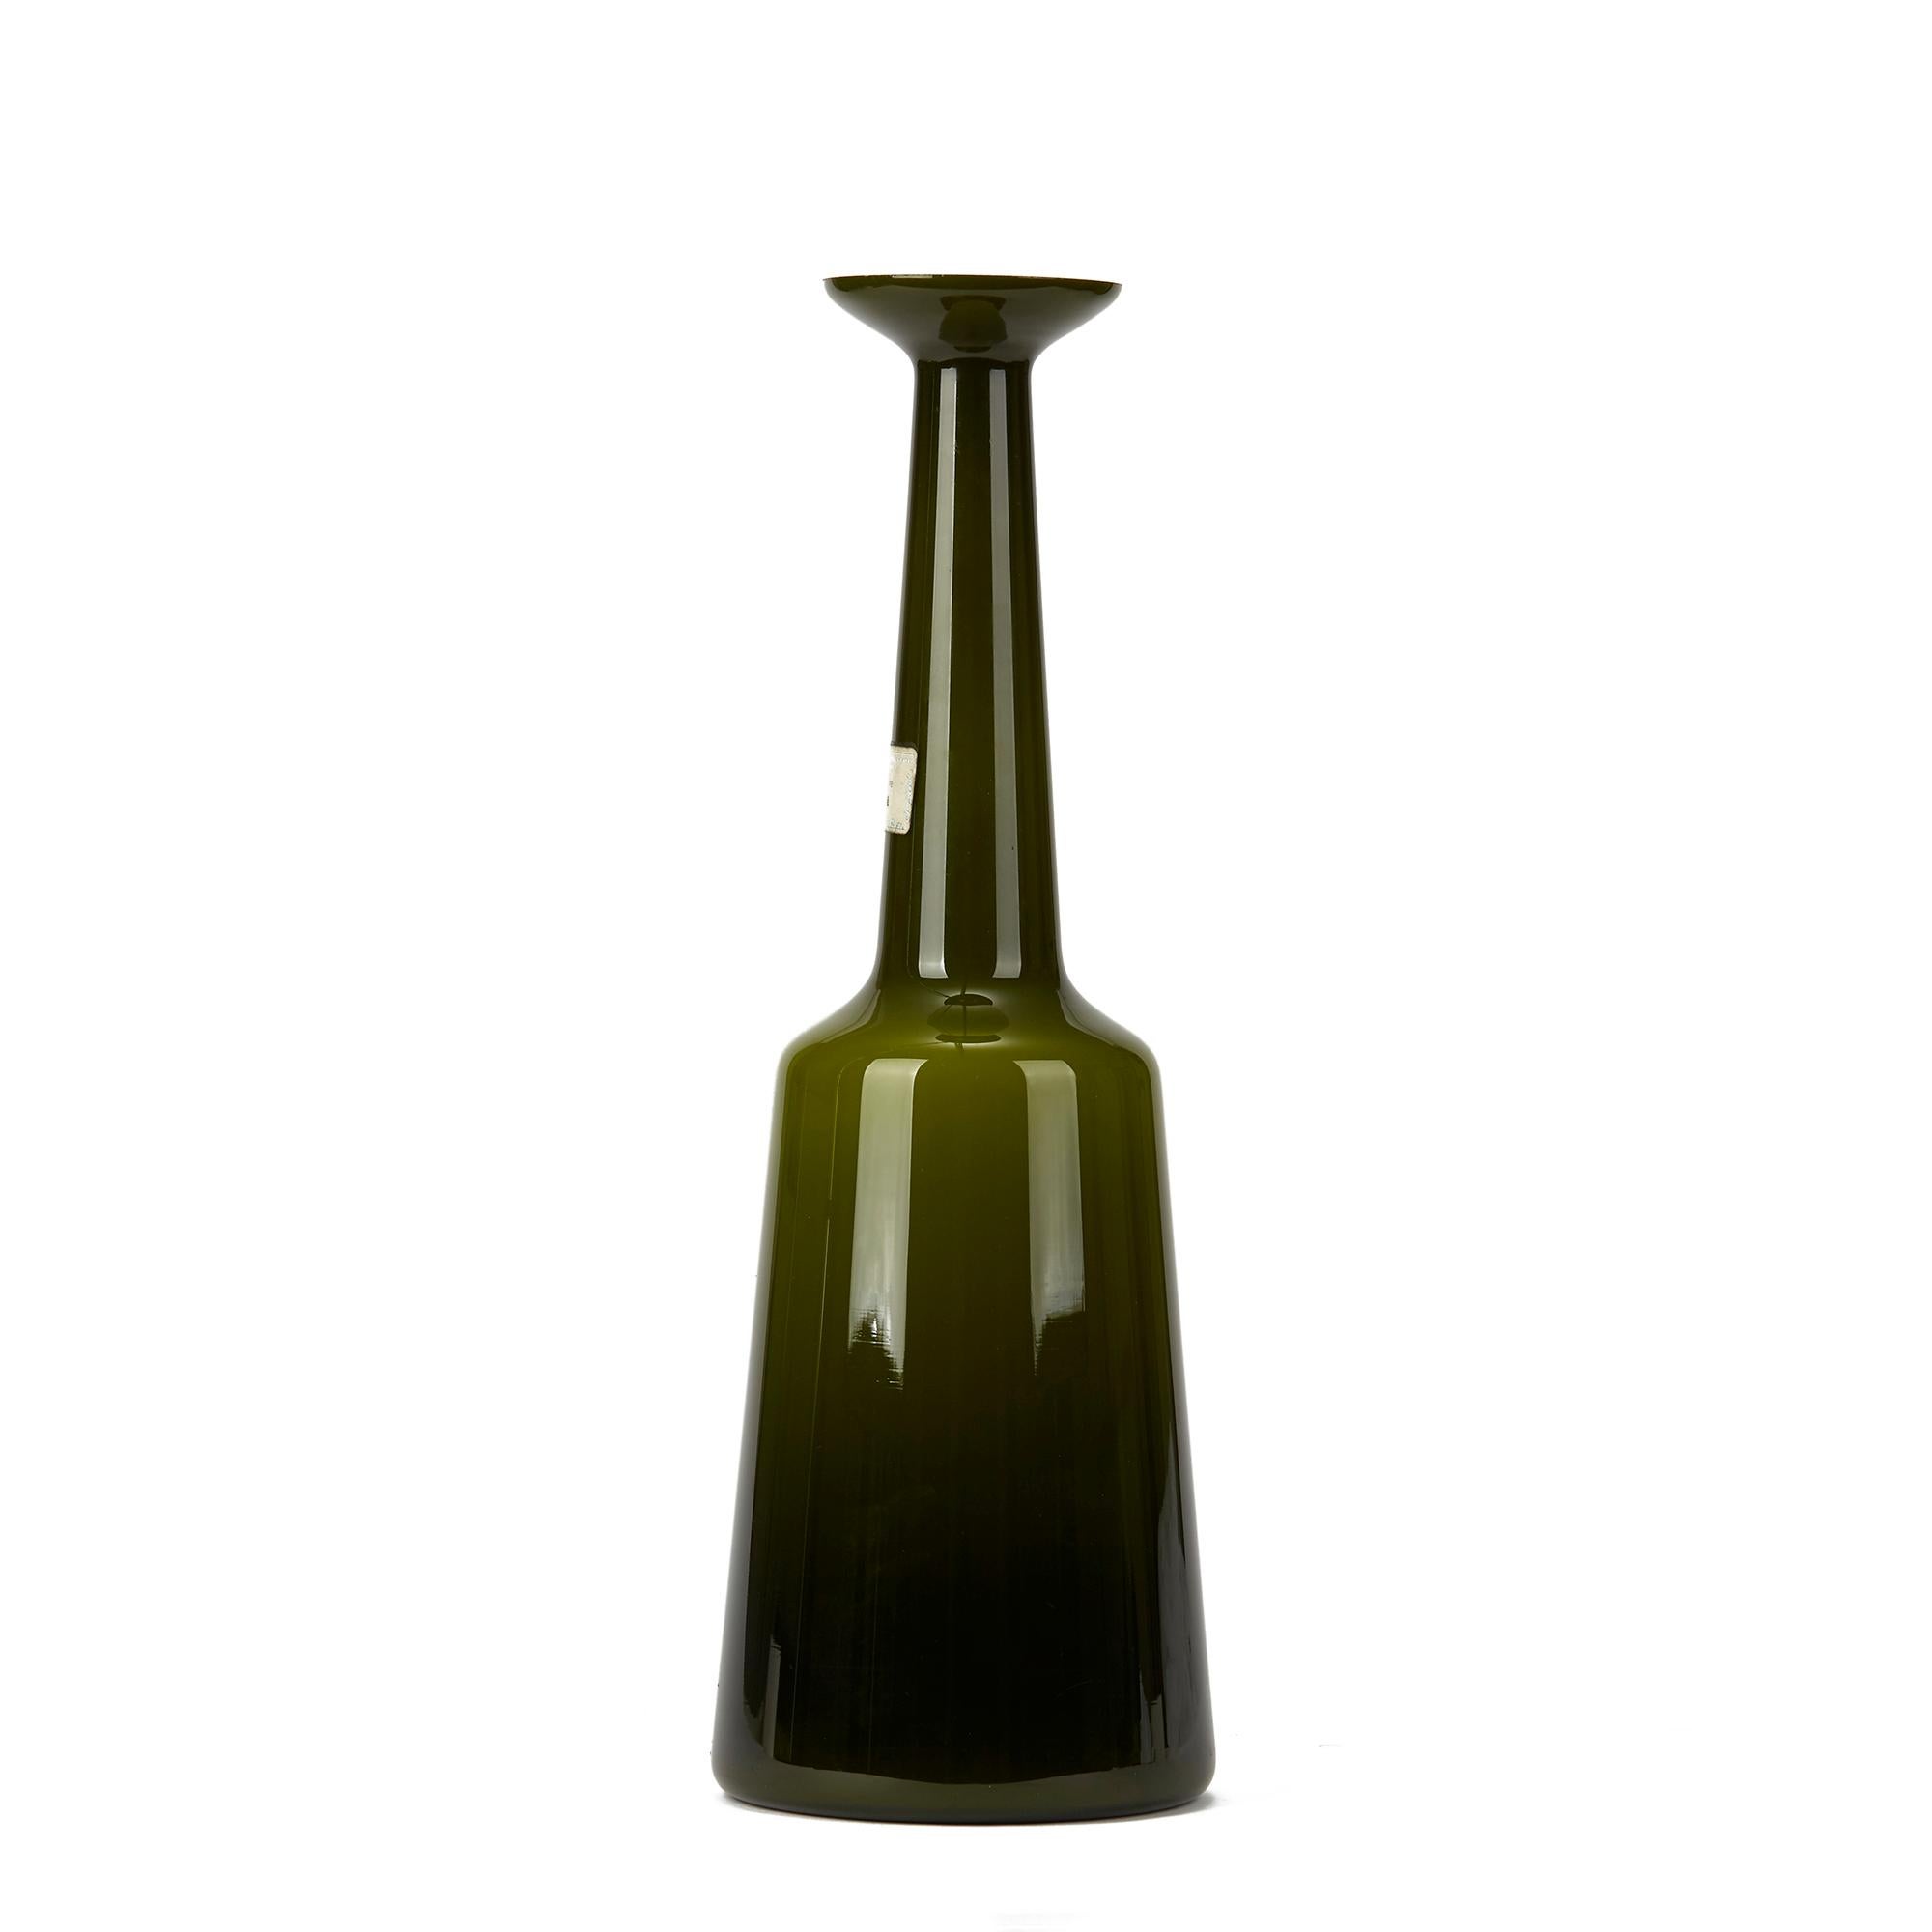 A very rare Danish Kastrup Holmegaard cased glass lamp base cased in green glass with a slightly tapered base leading up to a chimney neck with flared top. The lamp base has an original drilled hole to the lower edge and retains paper labels to the